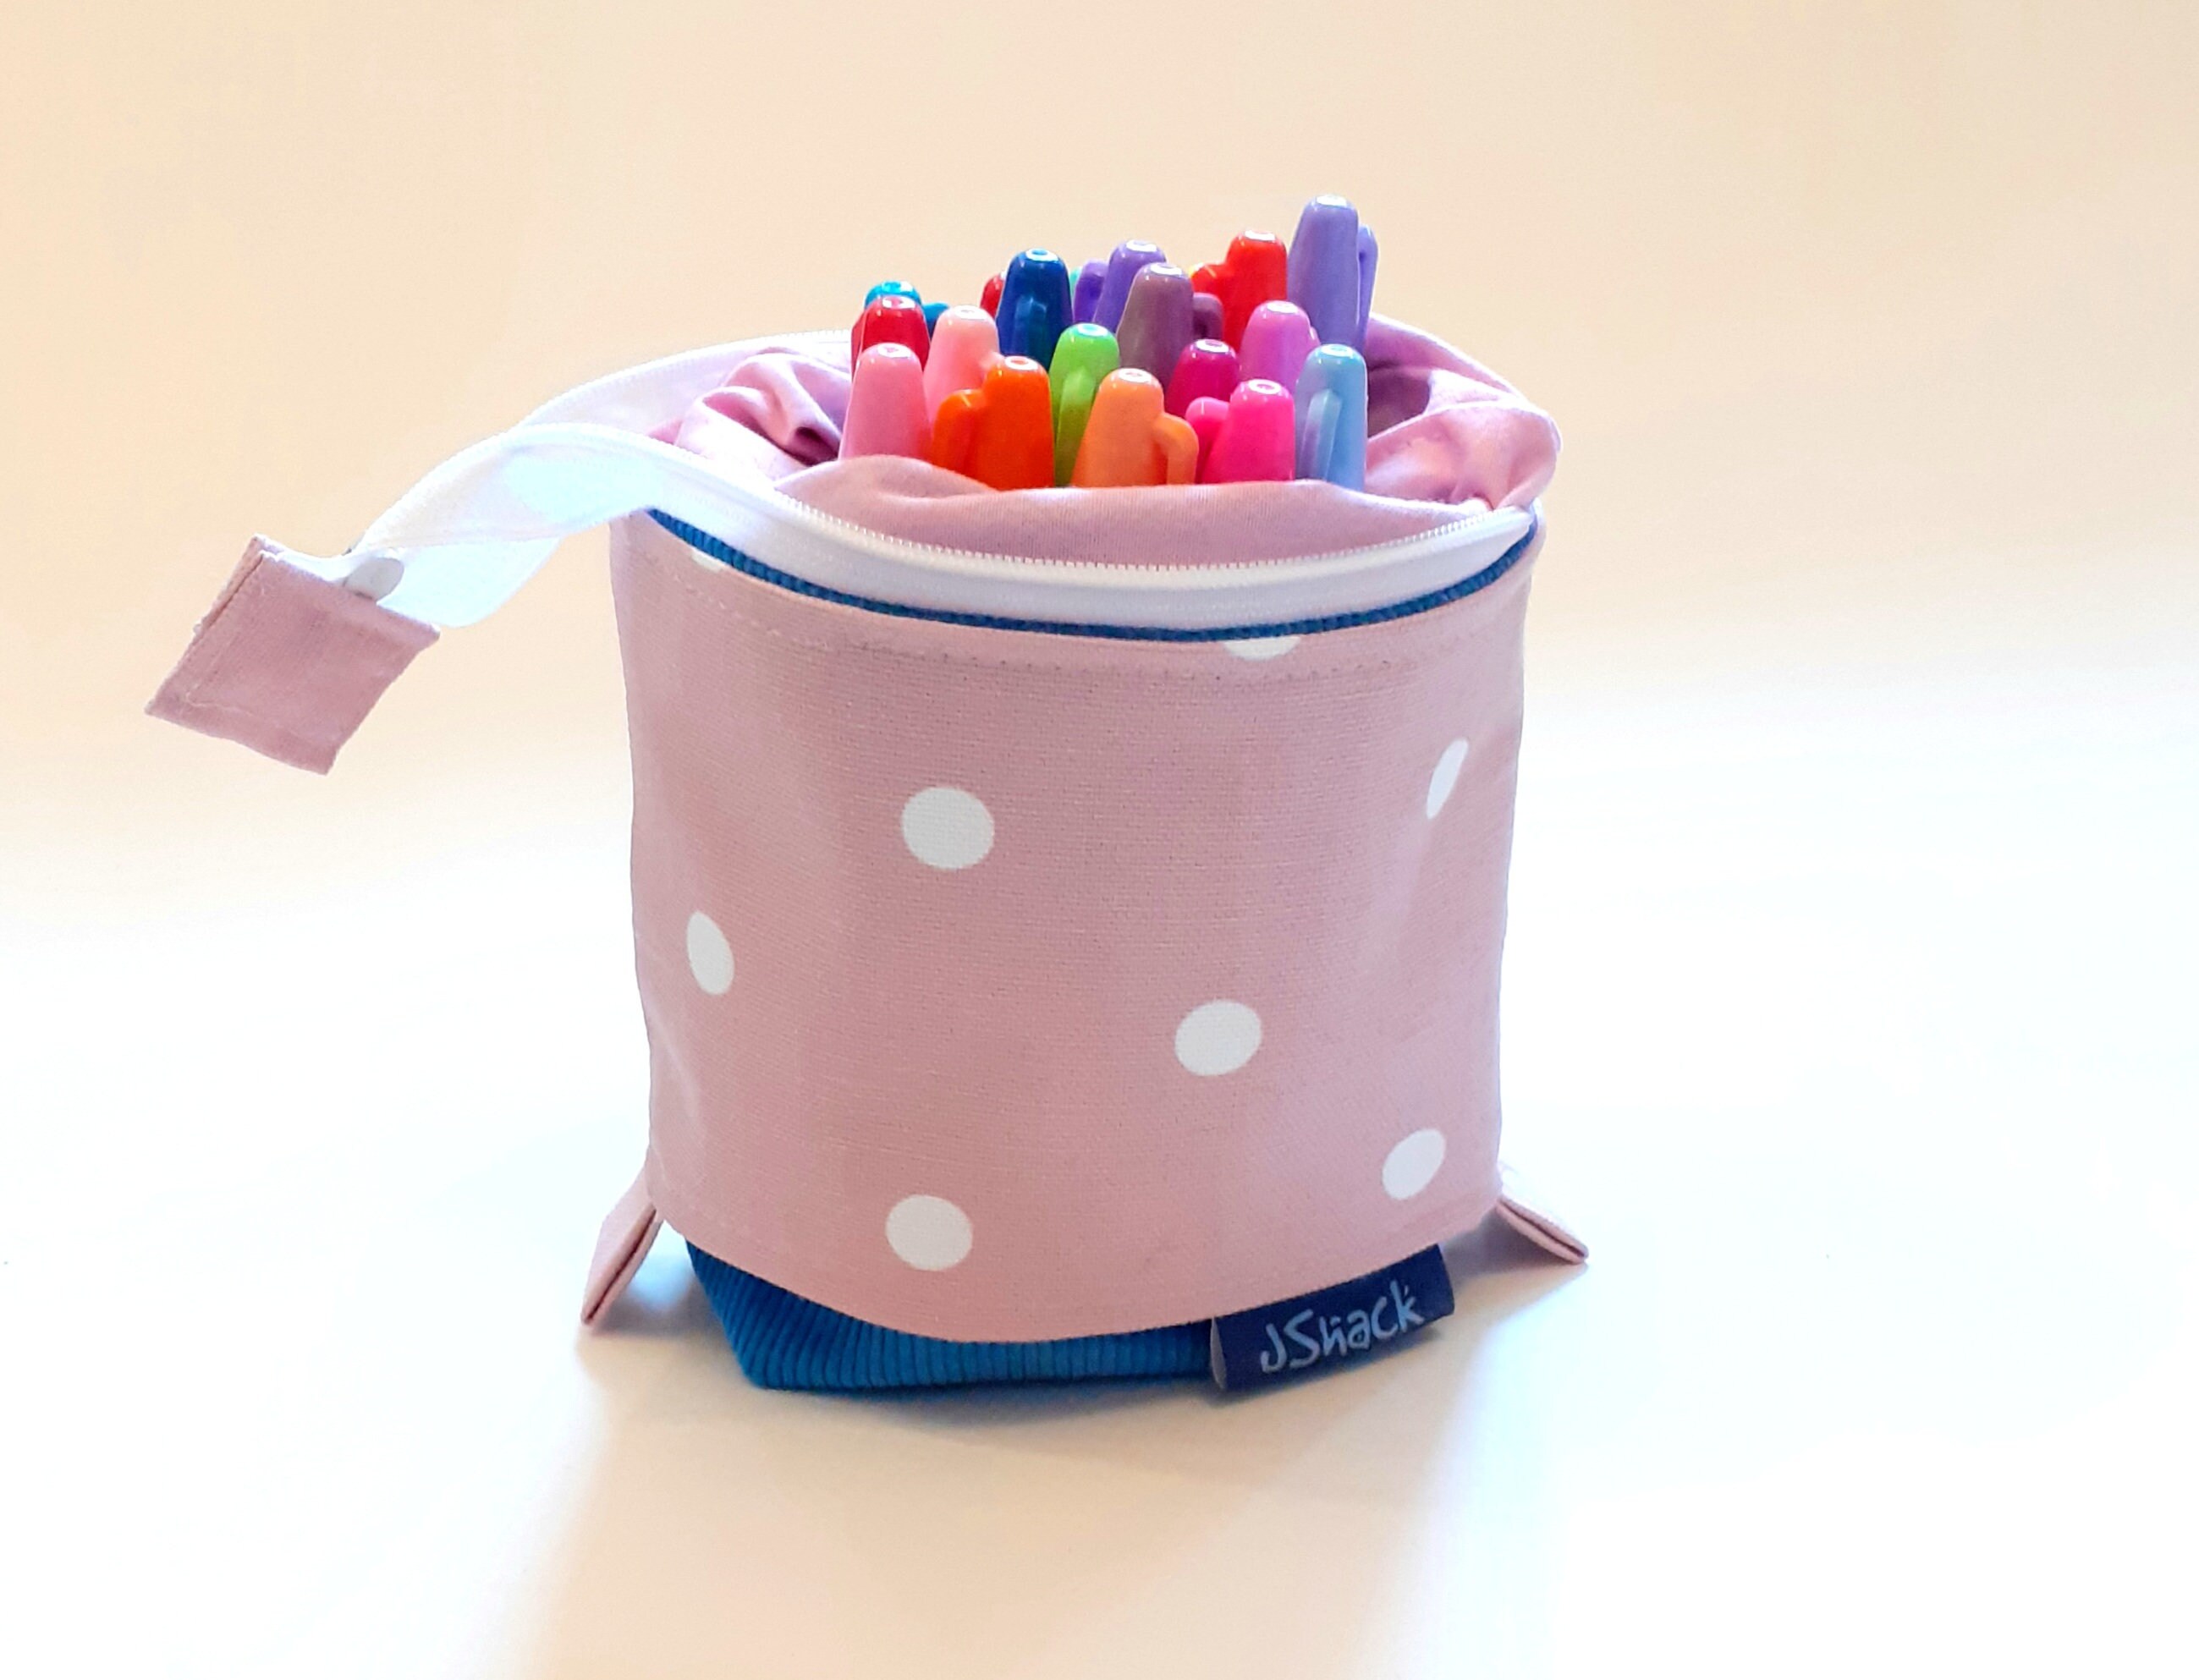 Polka Dot Pencil Case – Be in the Pink